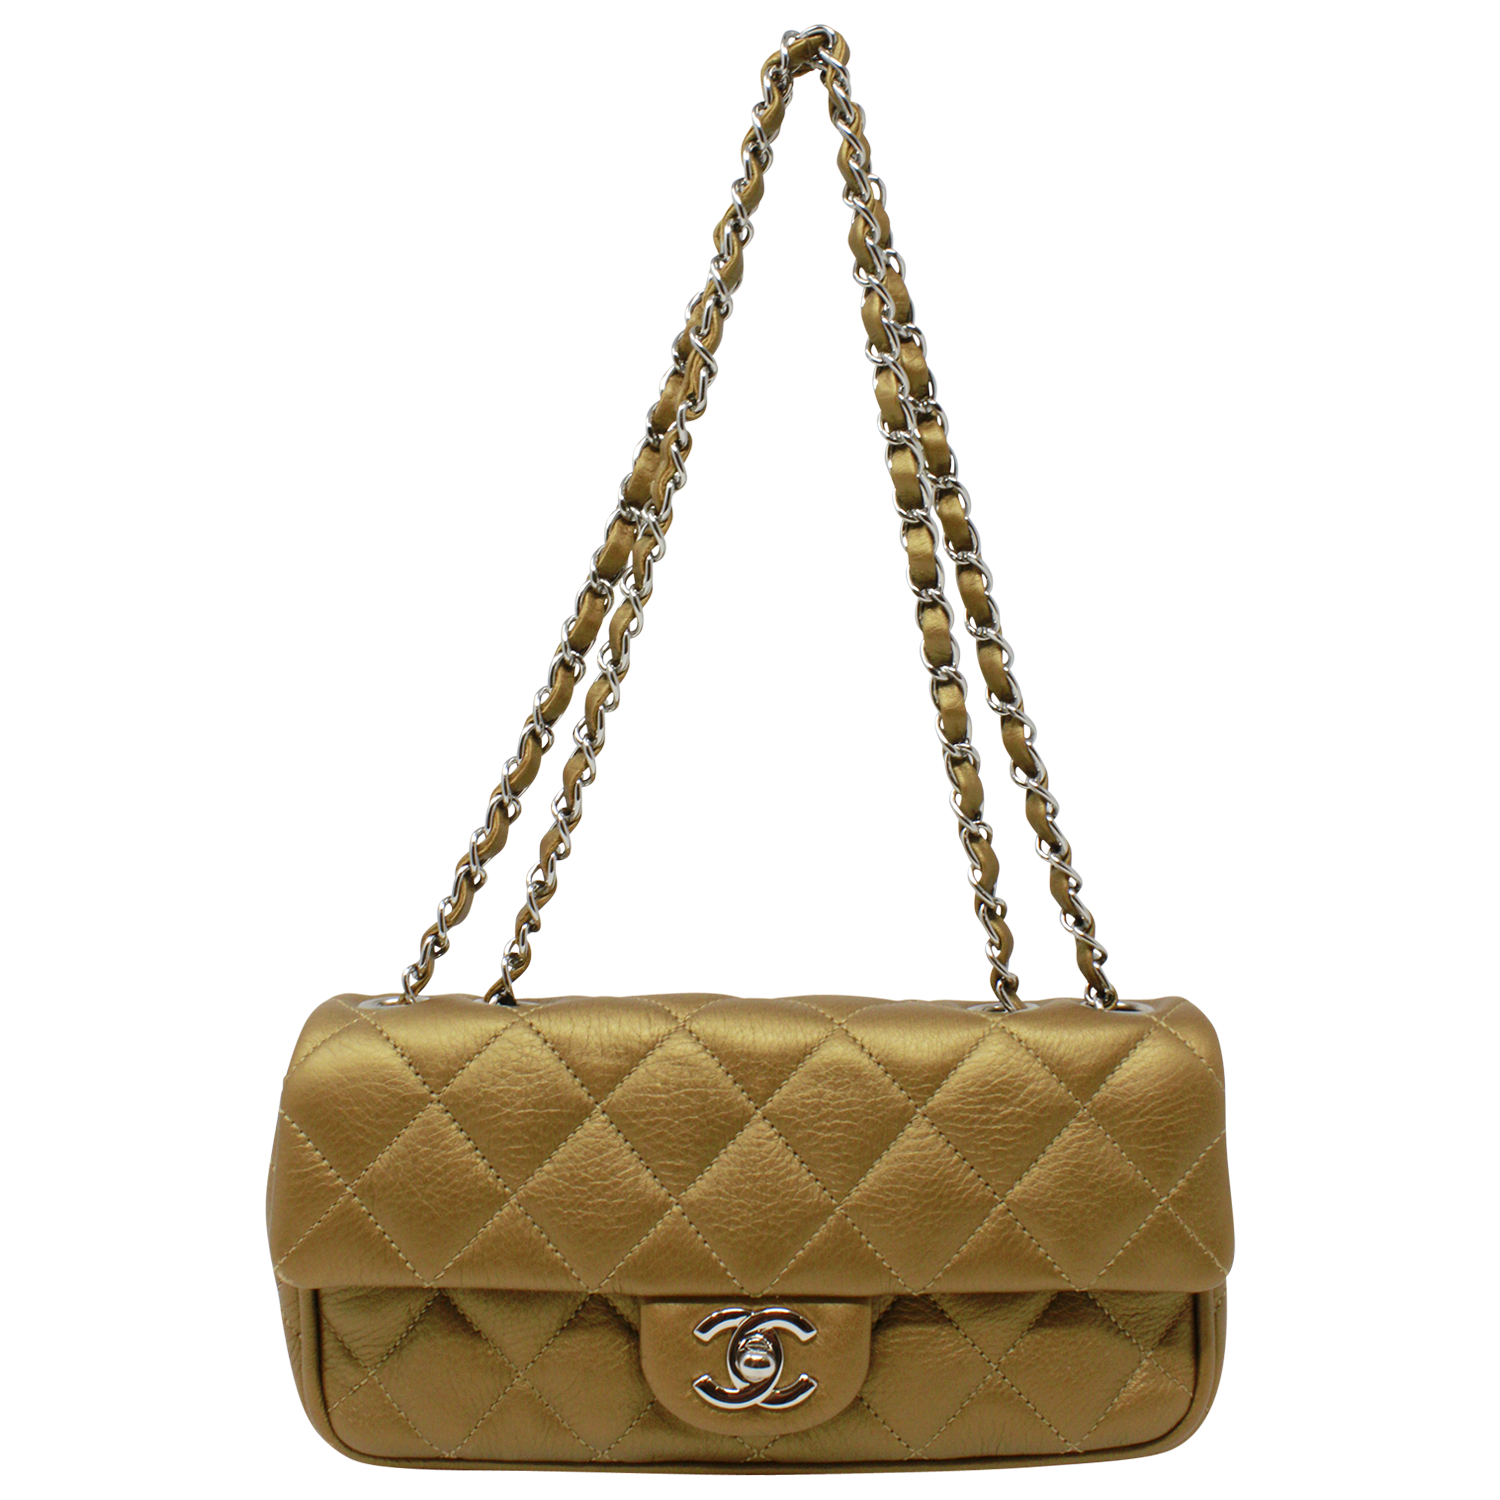 chanel flap bag green leather